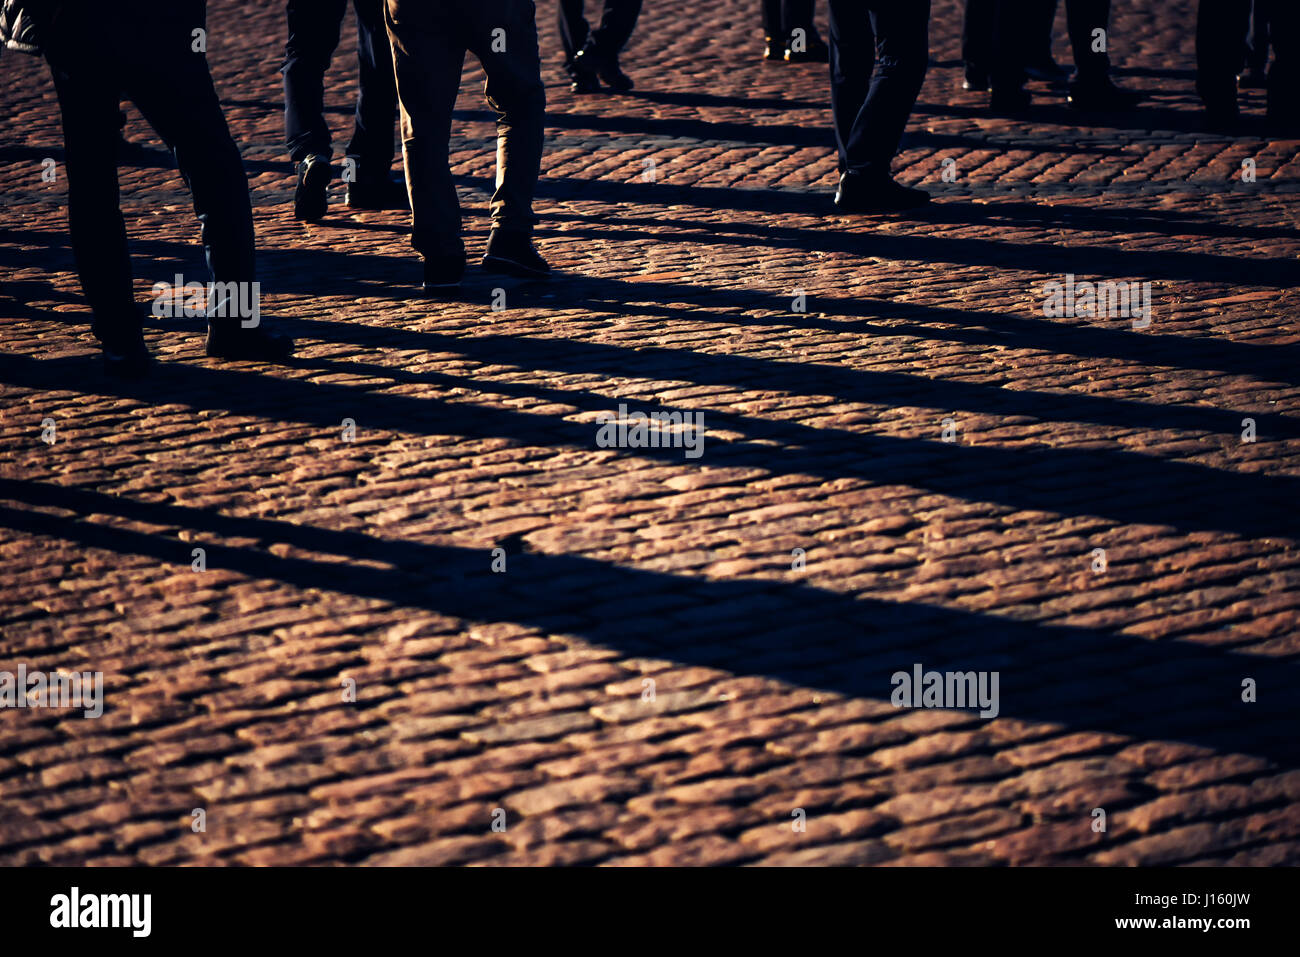 Crowd, group of people on the street, pedestrians walking on public location, general public concept for community and population themes, selective fo Stock Photo